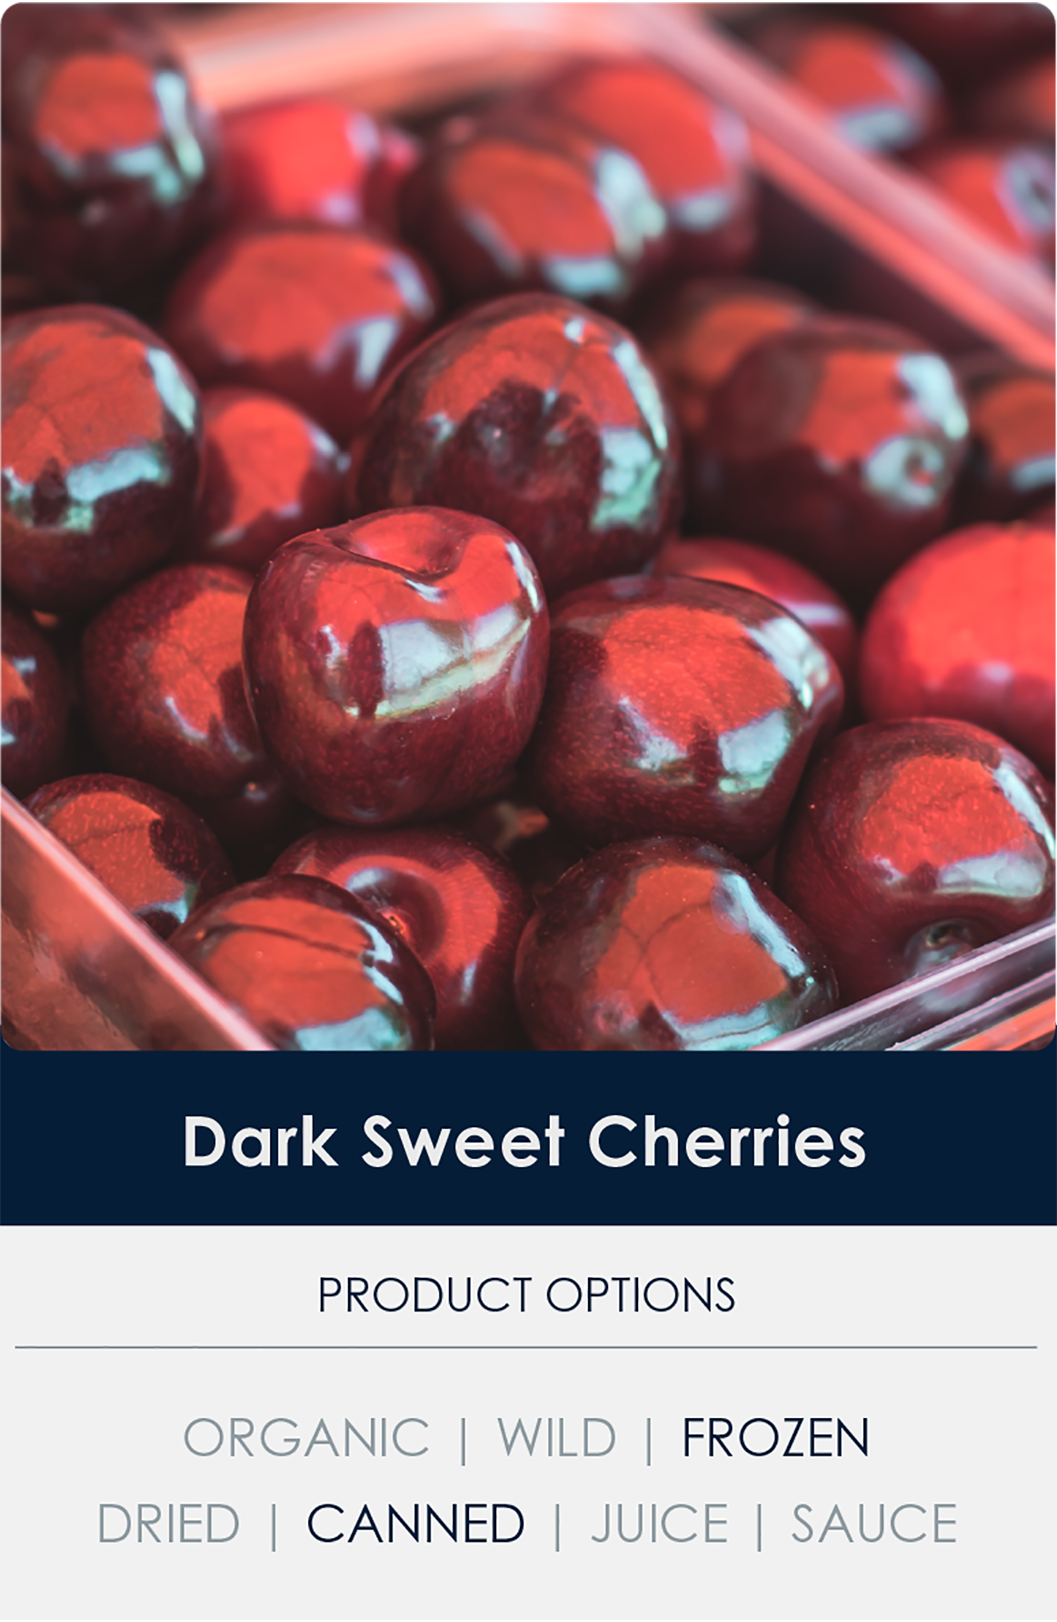 Dark Sweet Cherries with text: Product Options Organic Wild Frozen Dried Canned Juice Sauce.